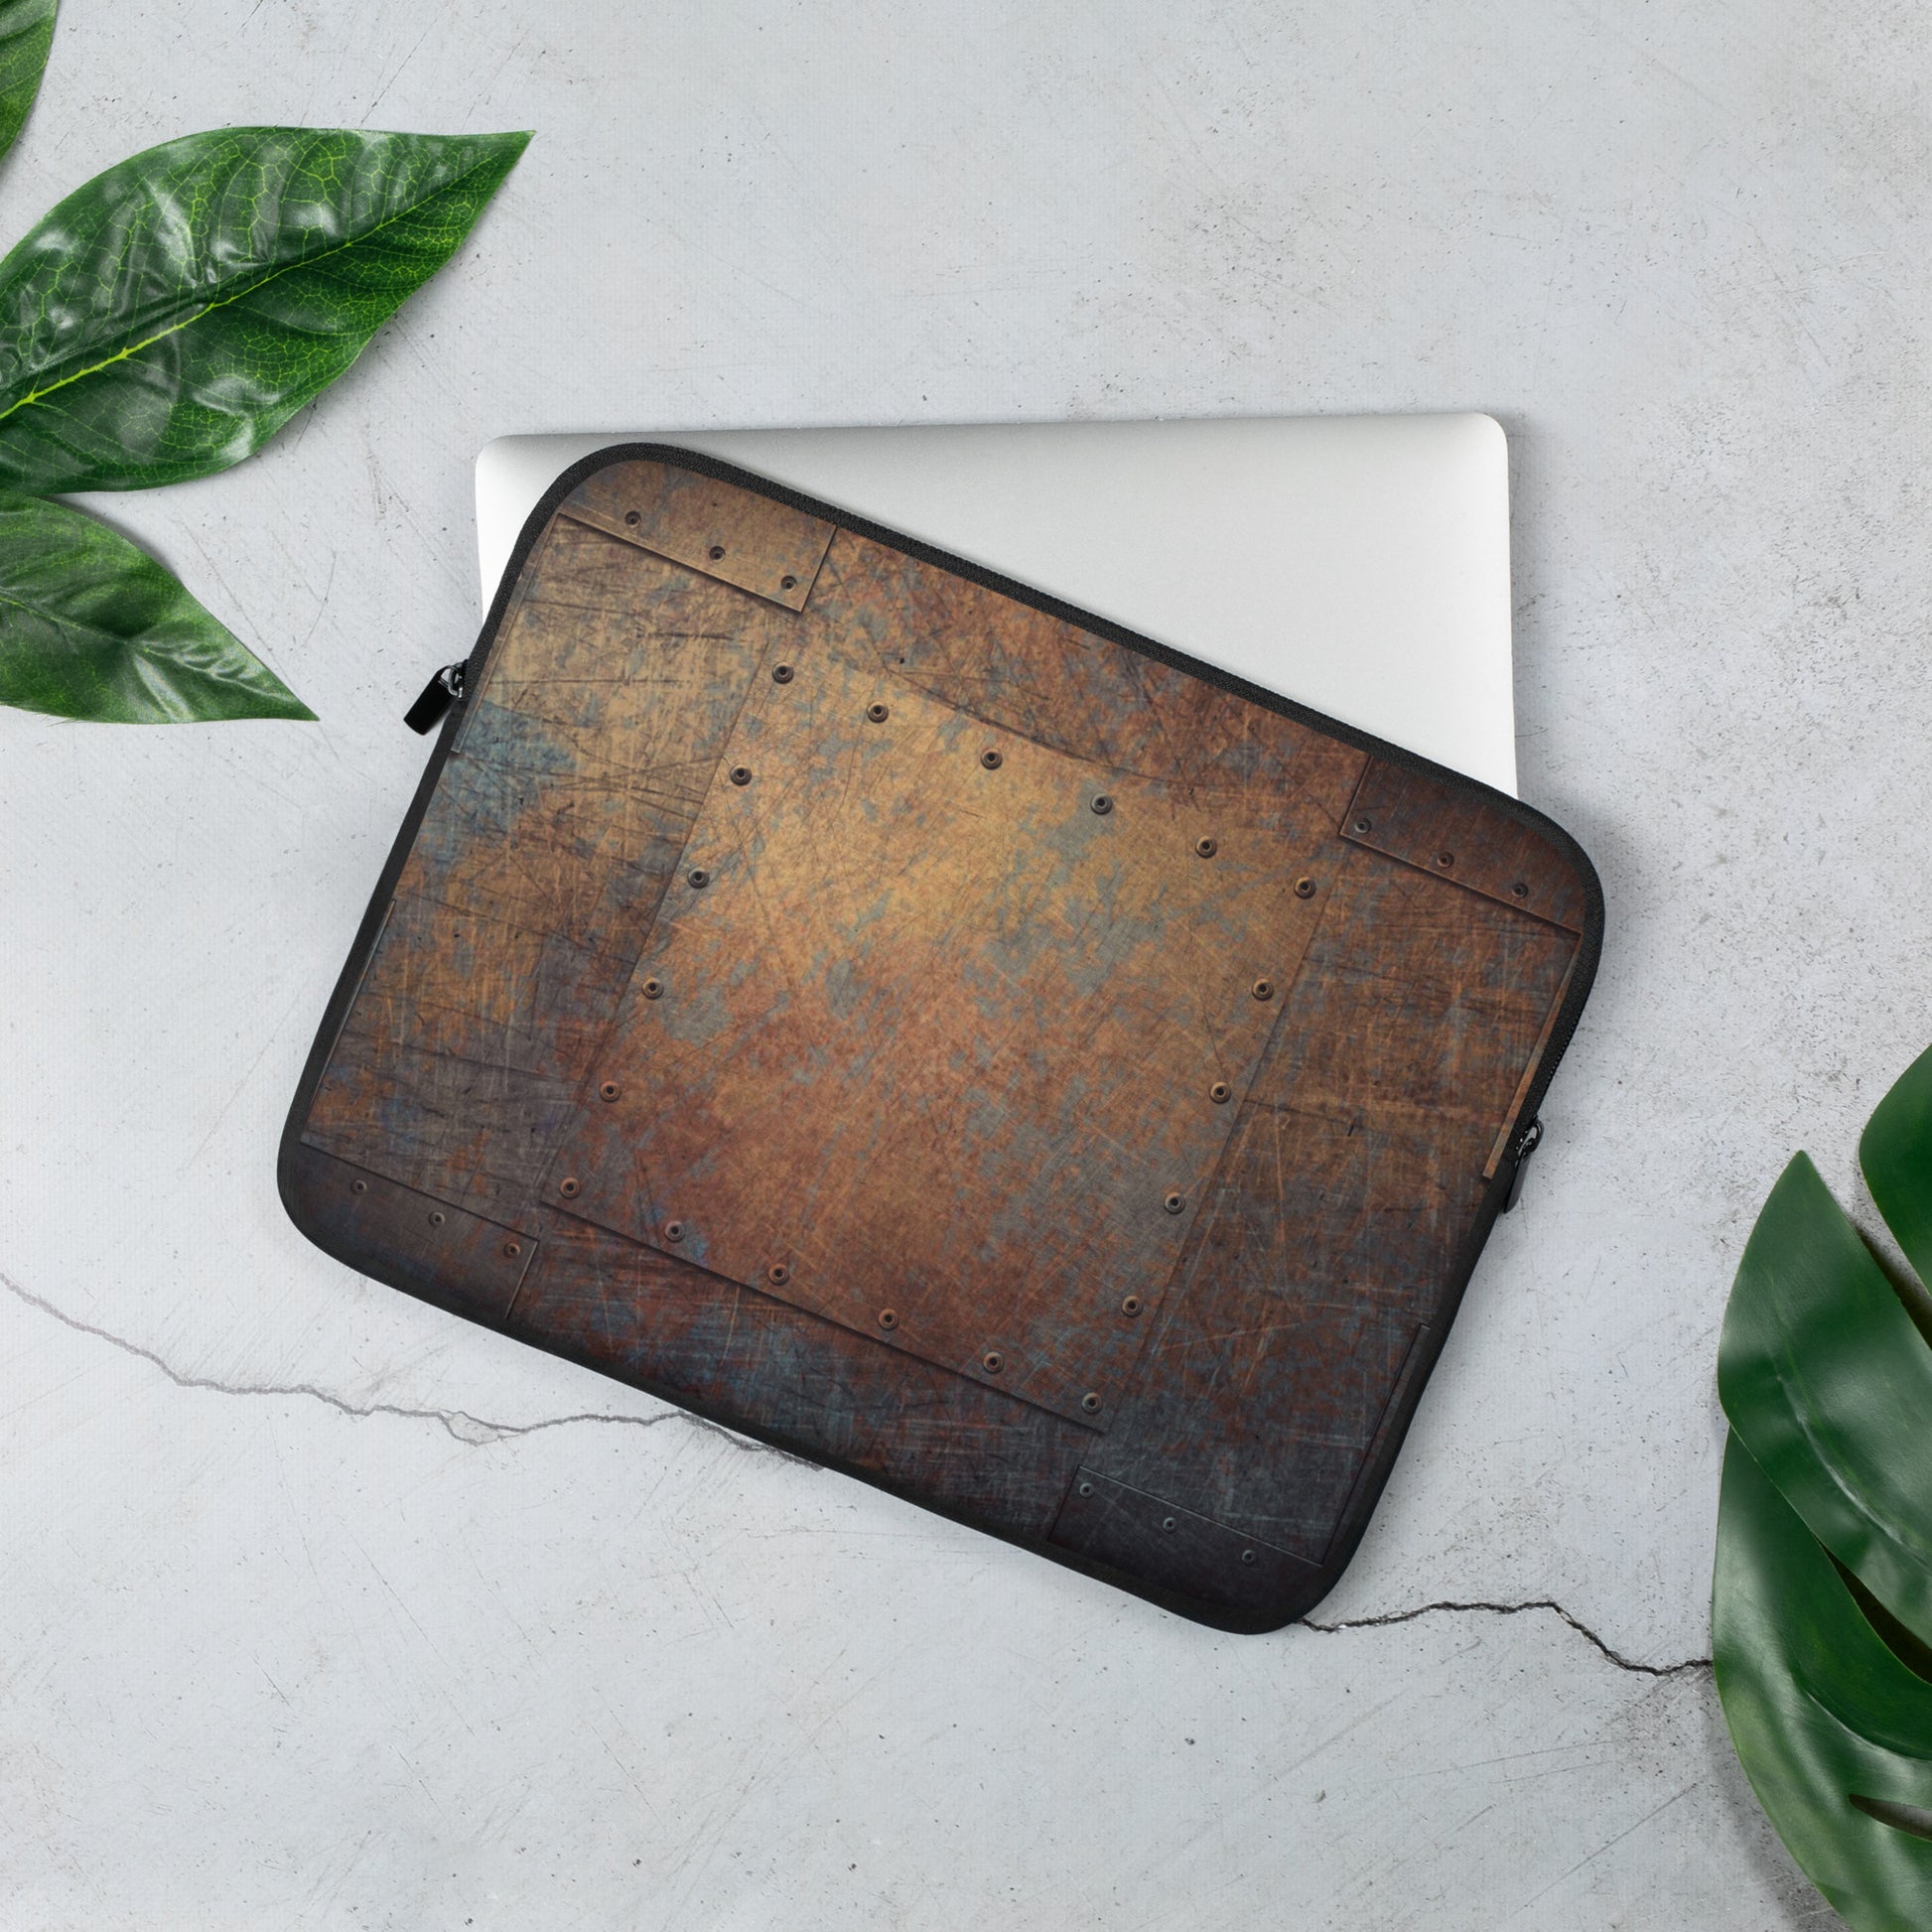 Steampunk, Industrial Themed Laptop Sleeve - Patinated, Weather Beaten, Riveted Copper Sheets Print 13 inches